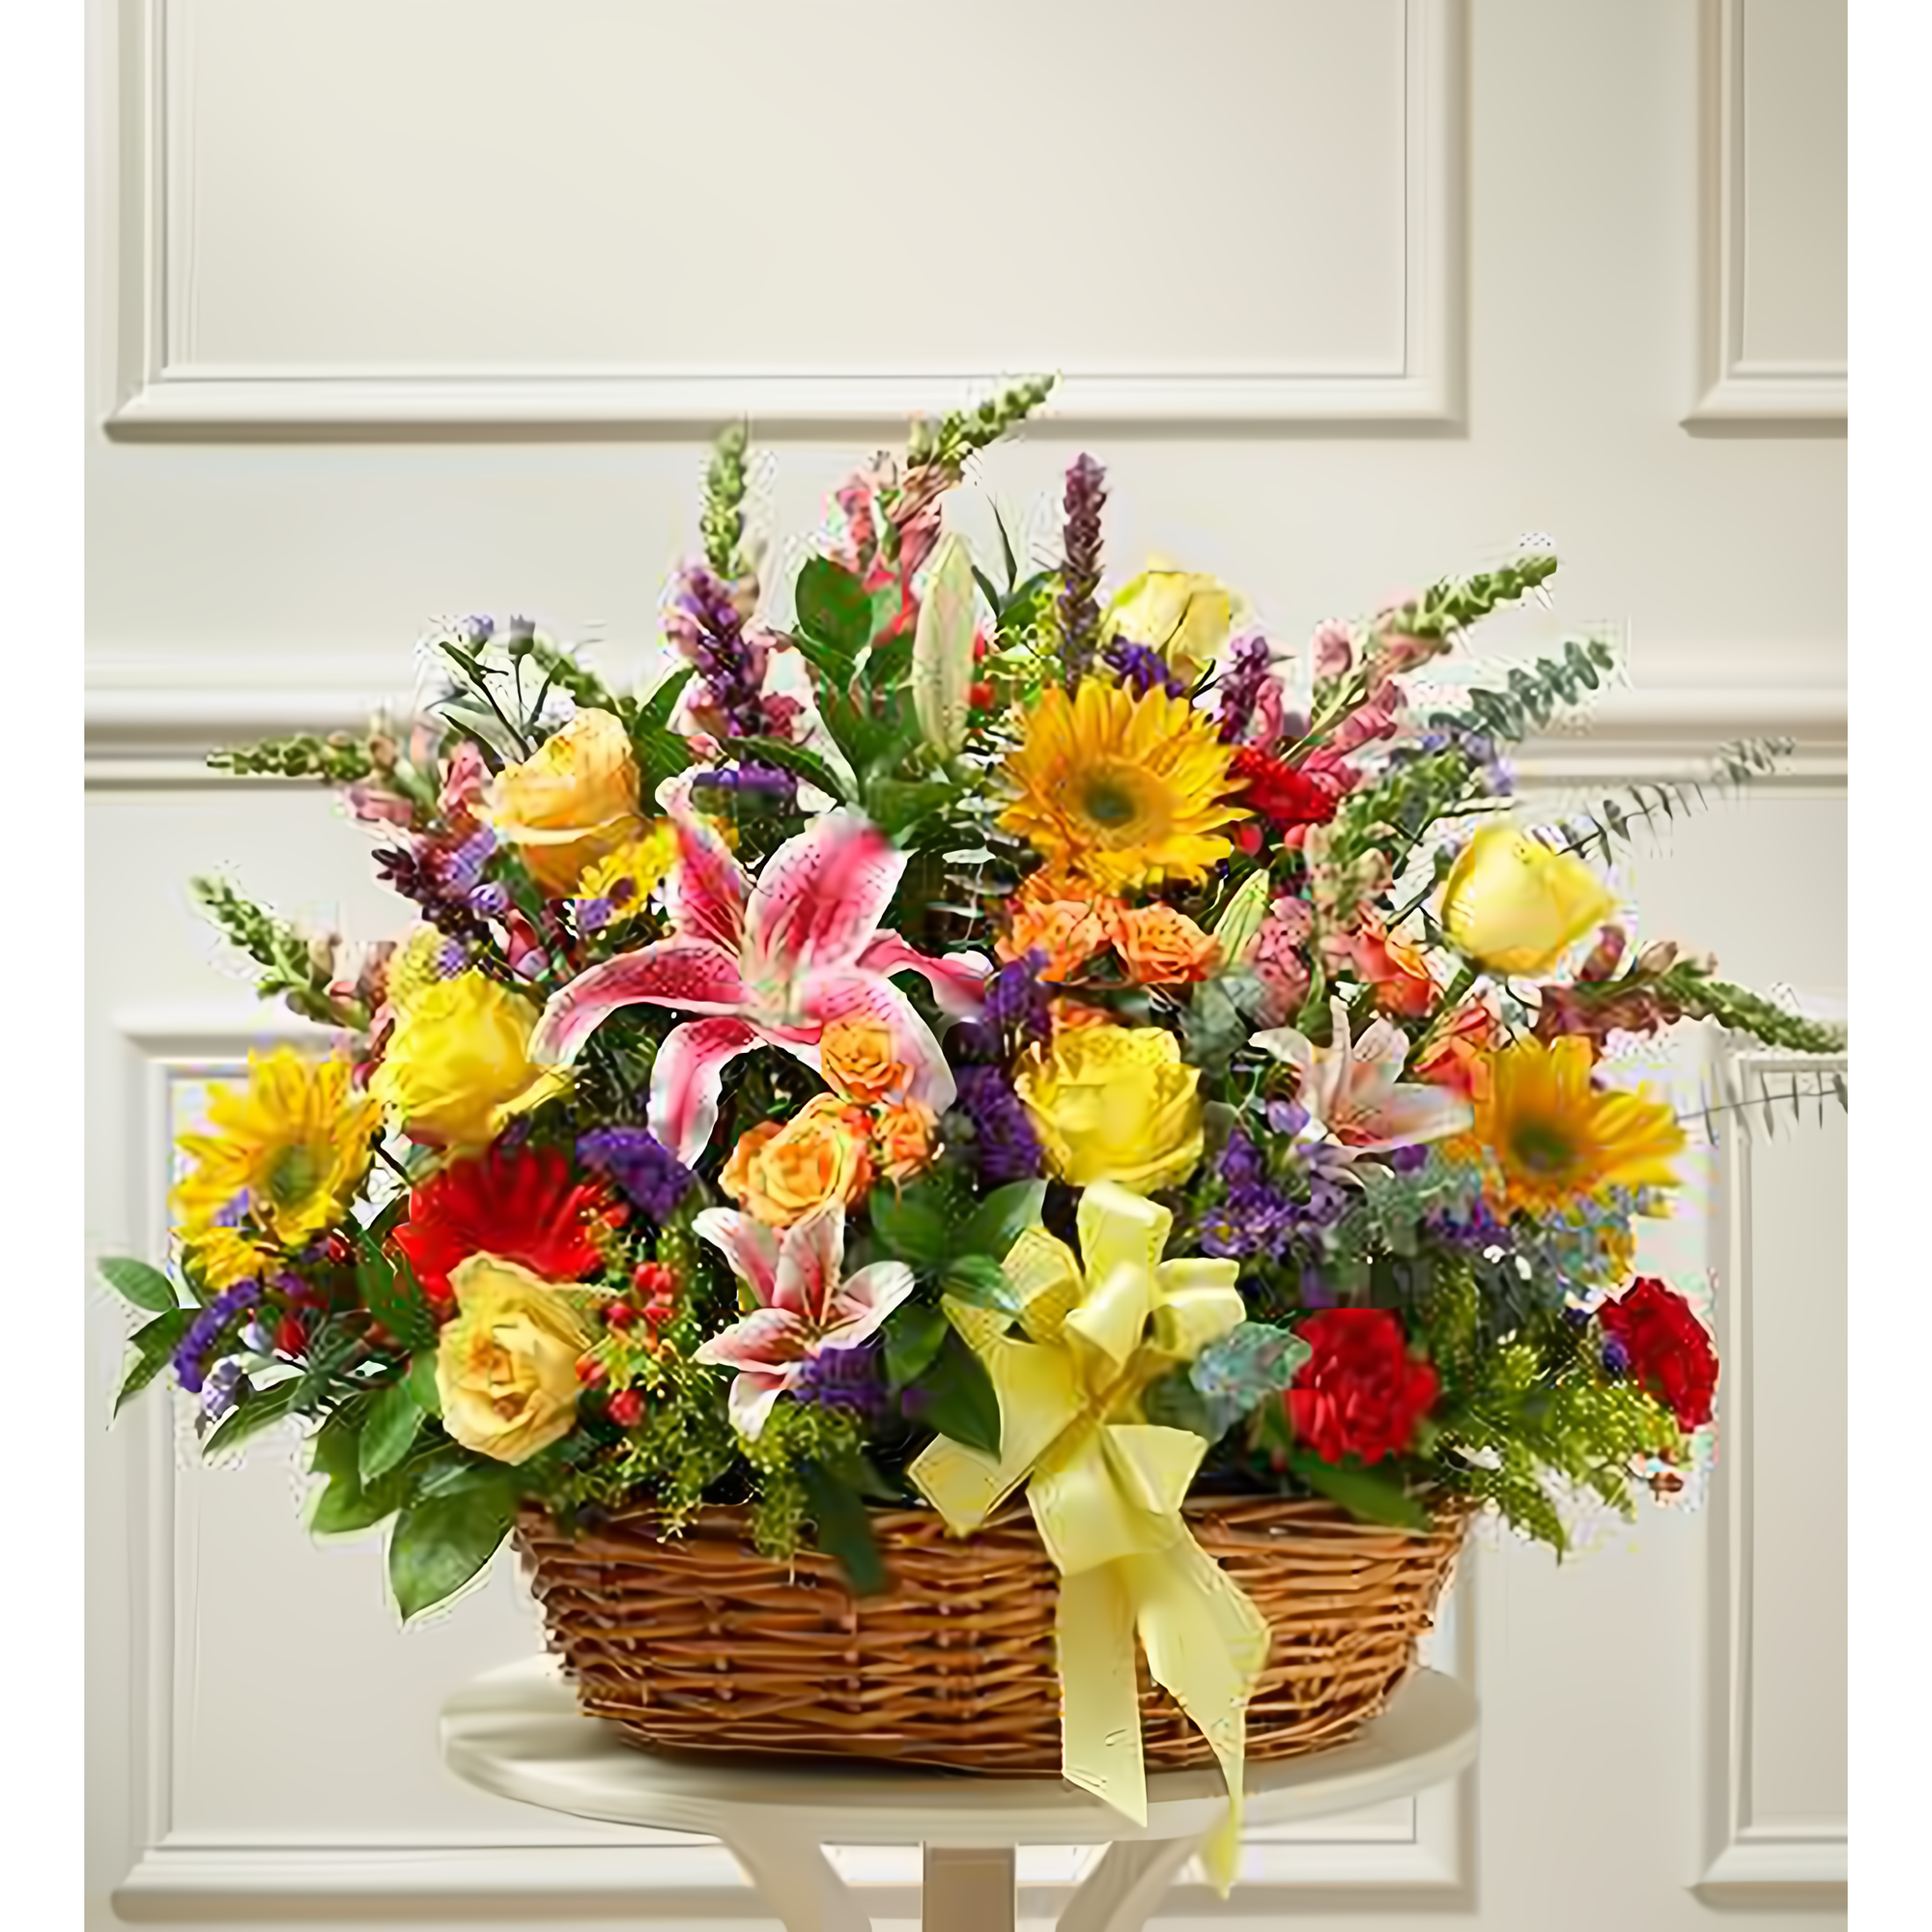 Bright Flower Sympathy Arrangement in Basket - Funeral > For the Service